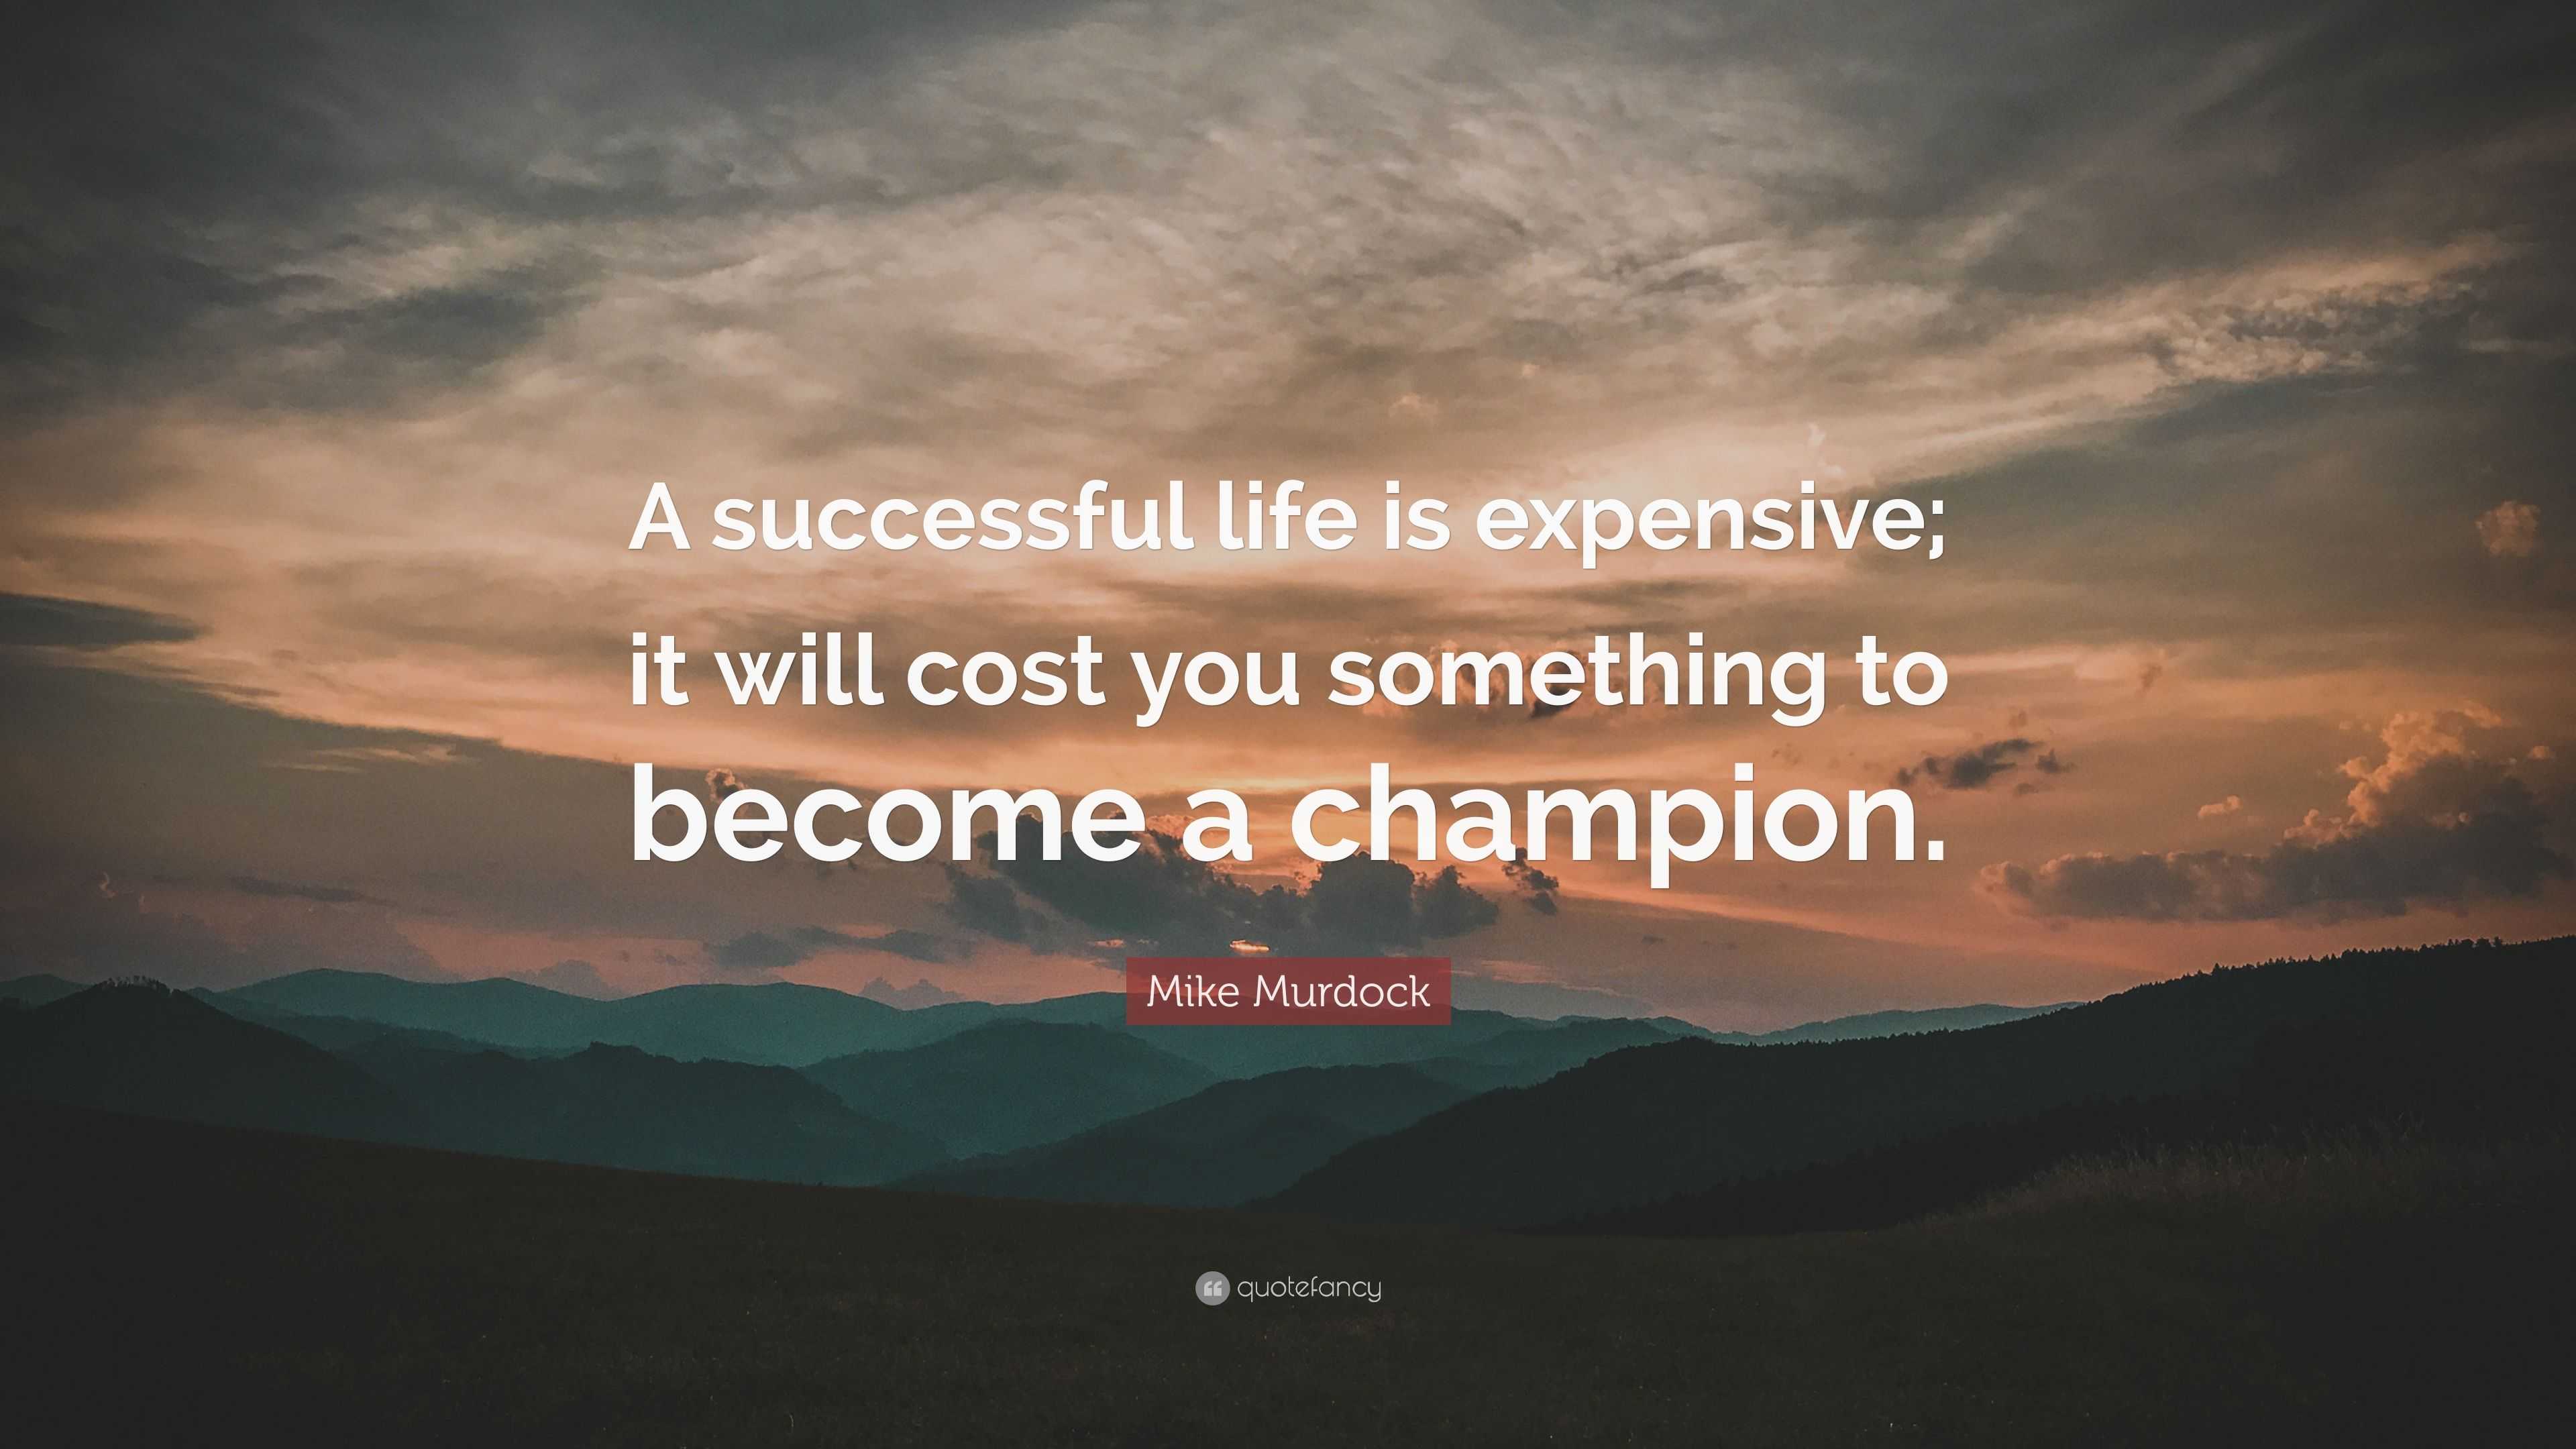 Mike Murdock Quote: “A successful life is expensive; it will cost you